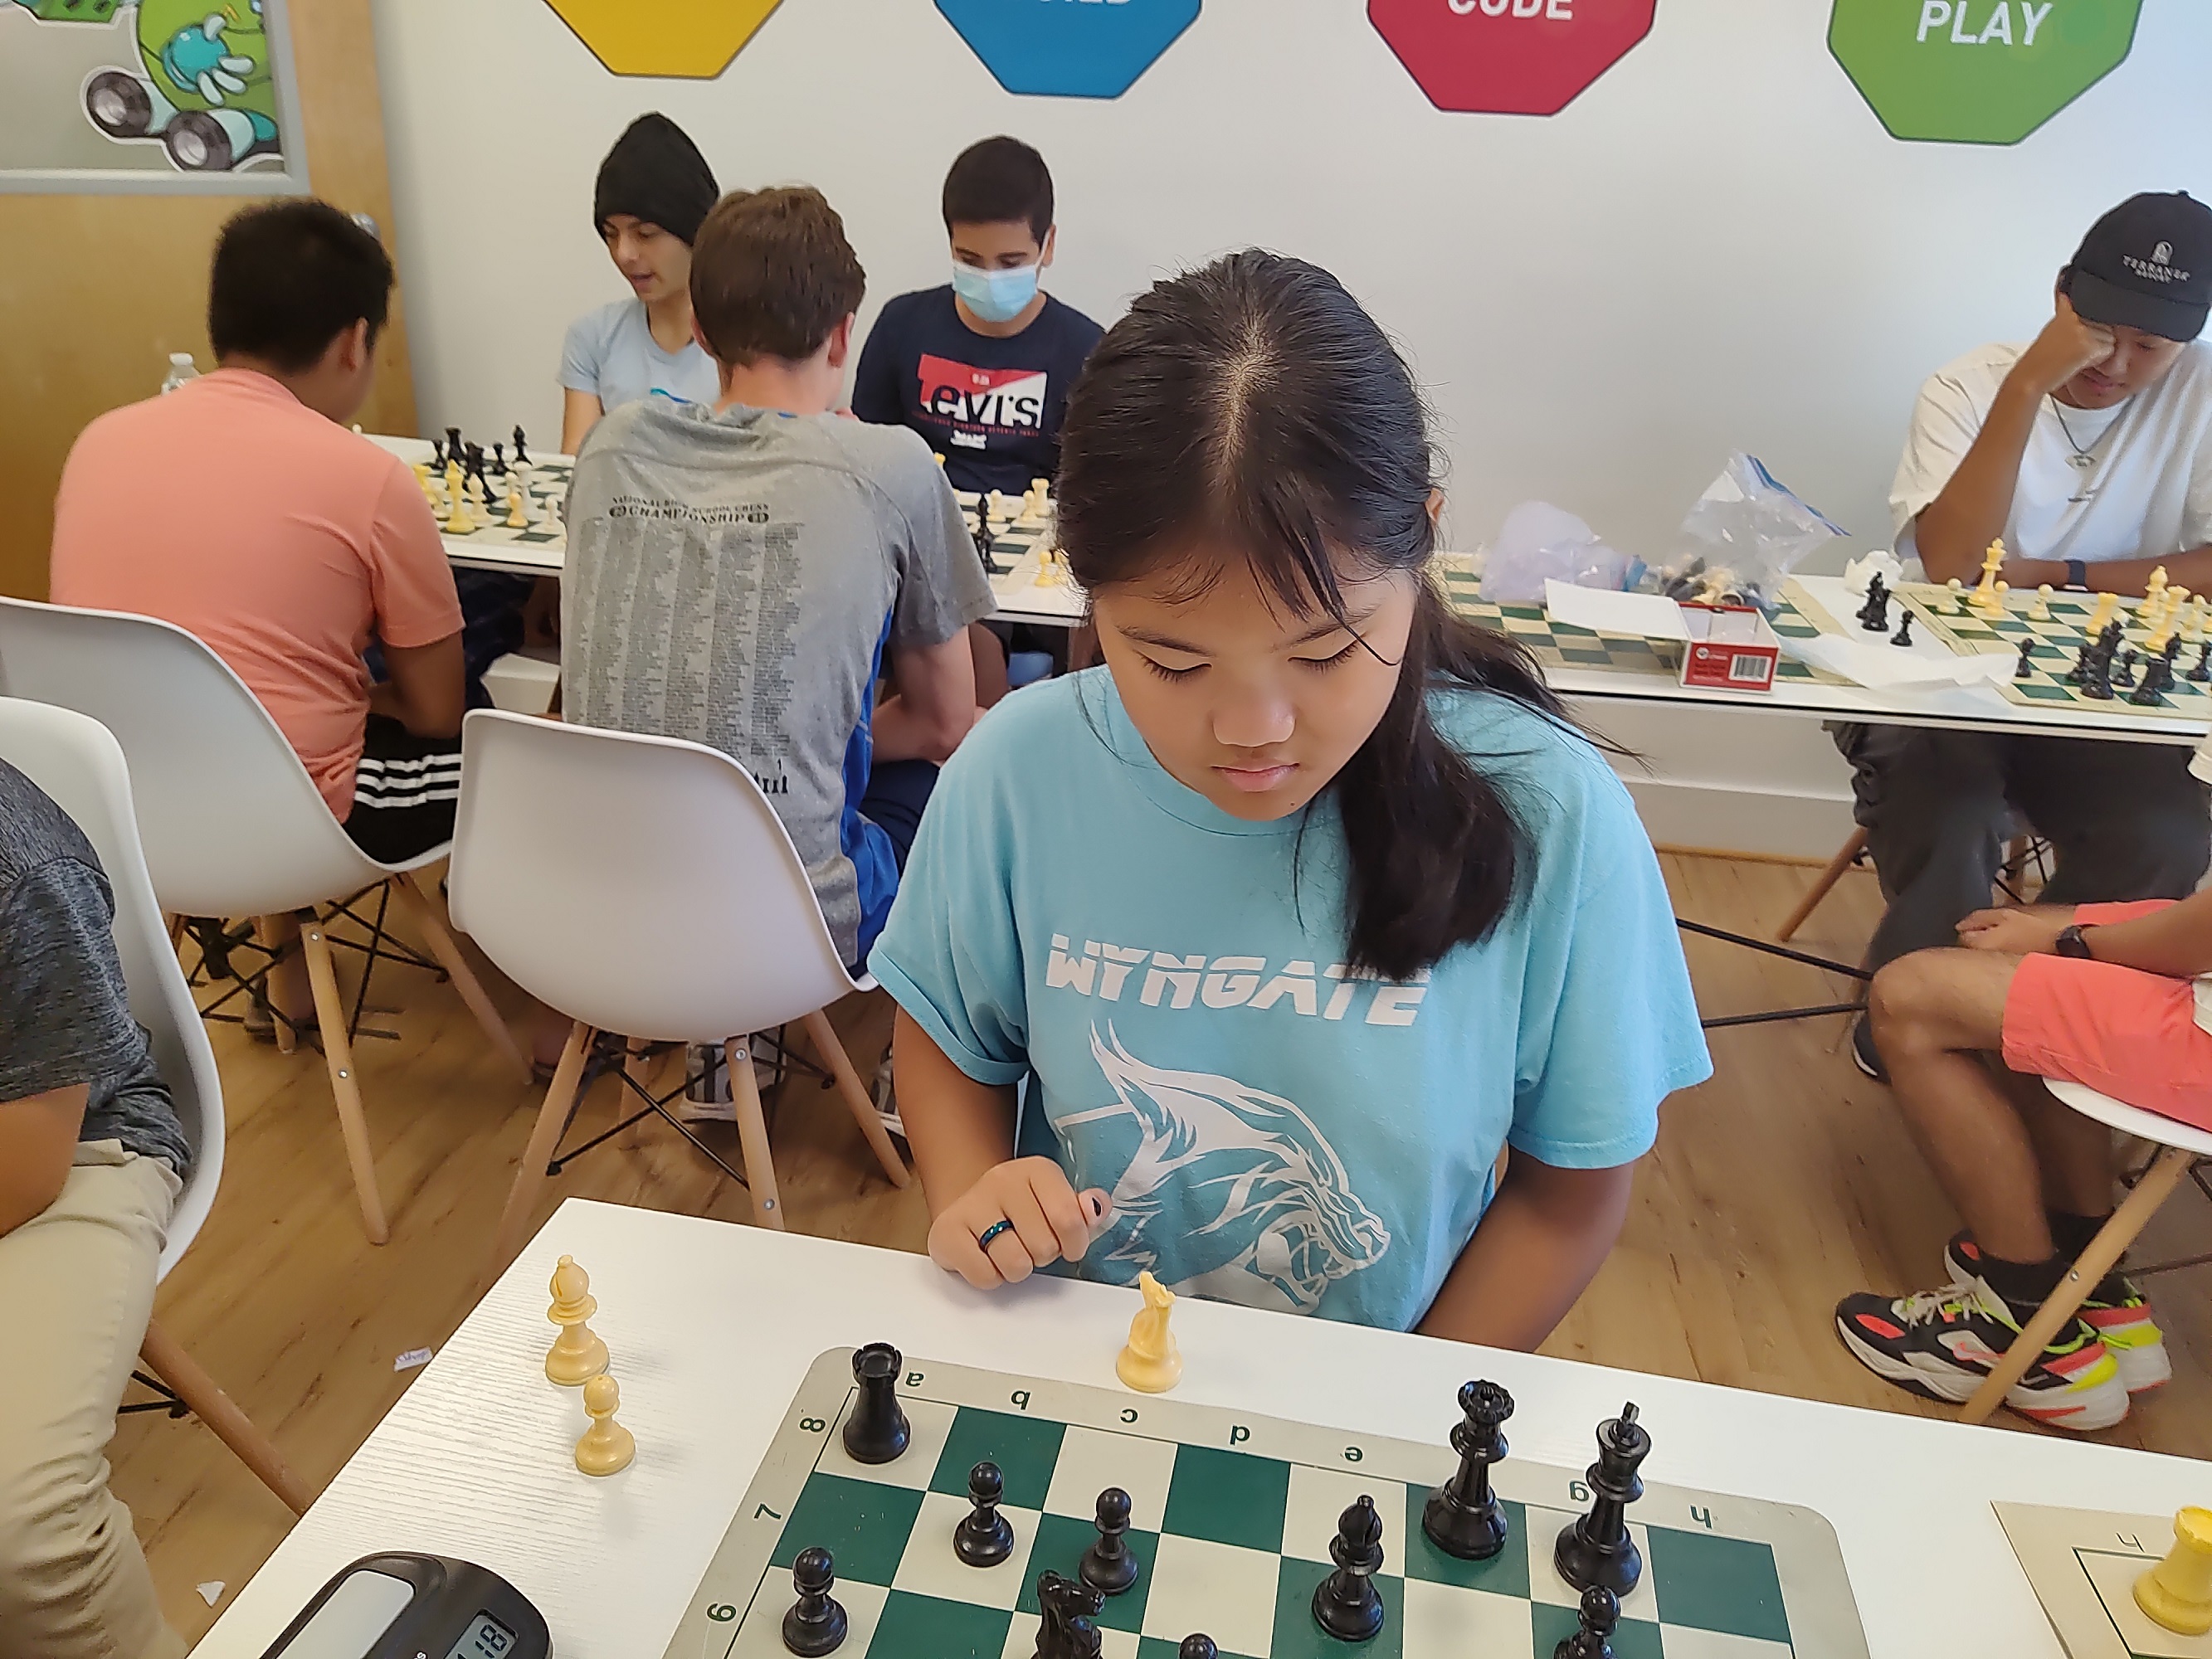 Chess inspires 17-year-old student to help others locally and